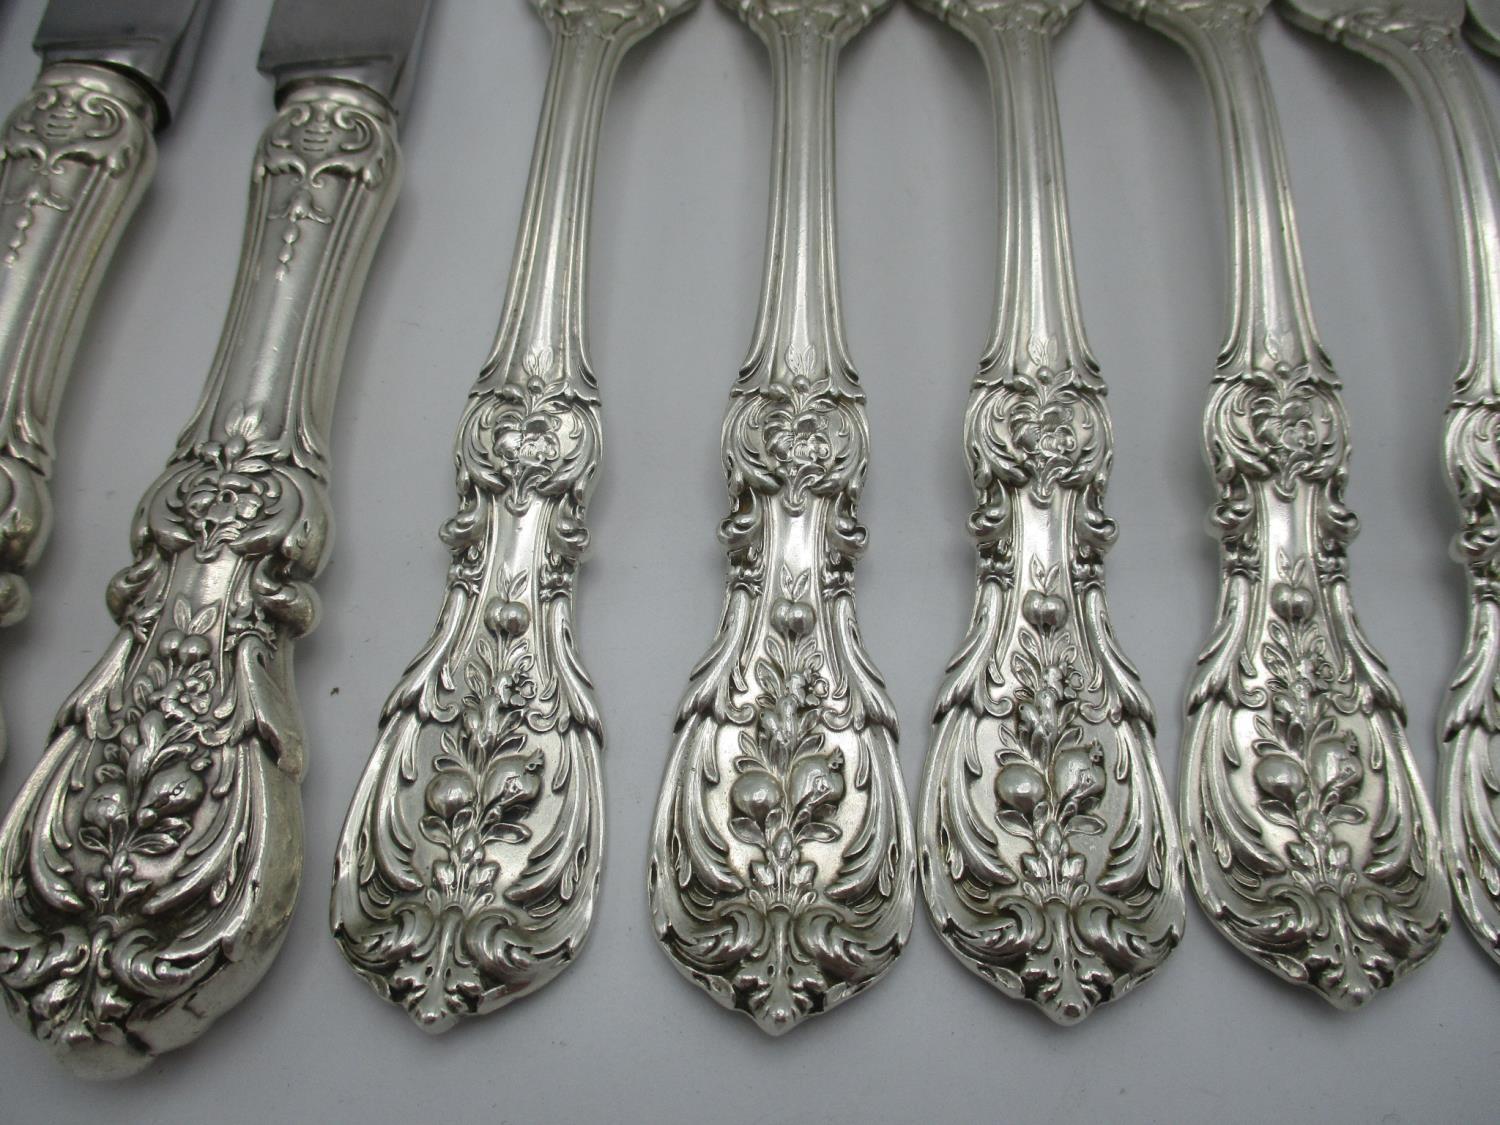 A set of 20th century American silver flatware by Reed & Barton, in the Francis I pattern, - Image 2 of 6